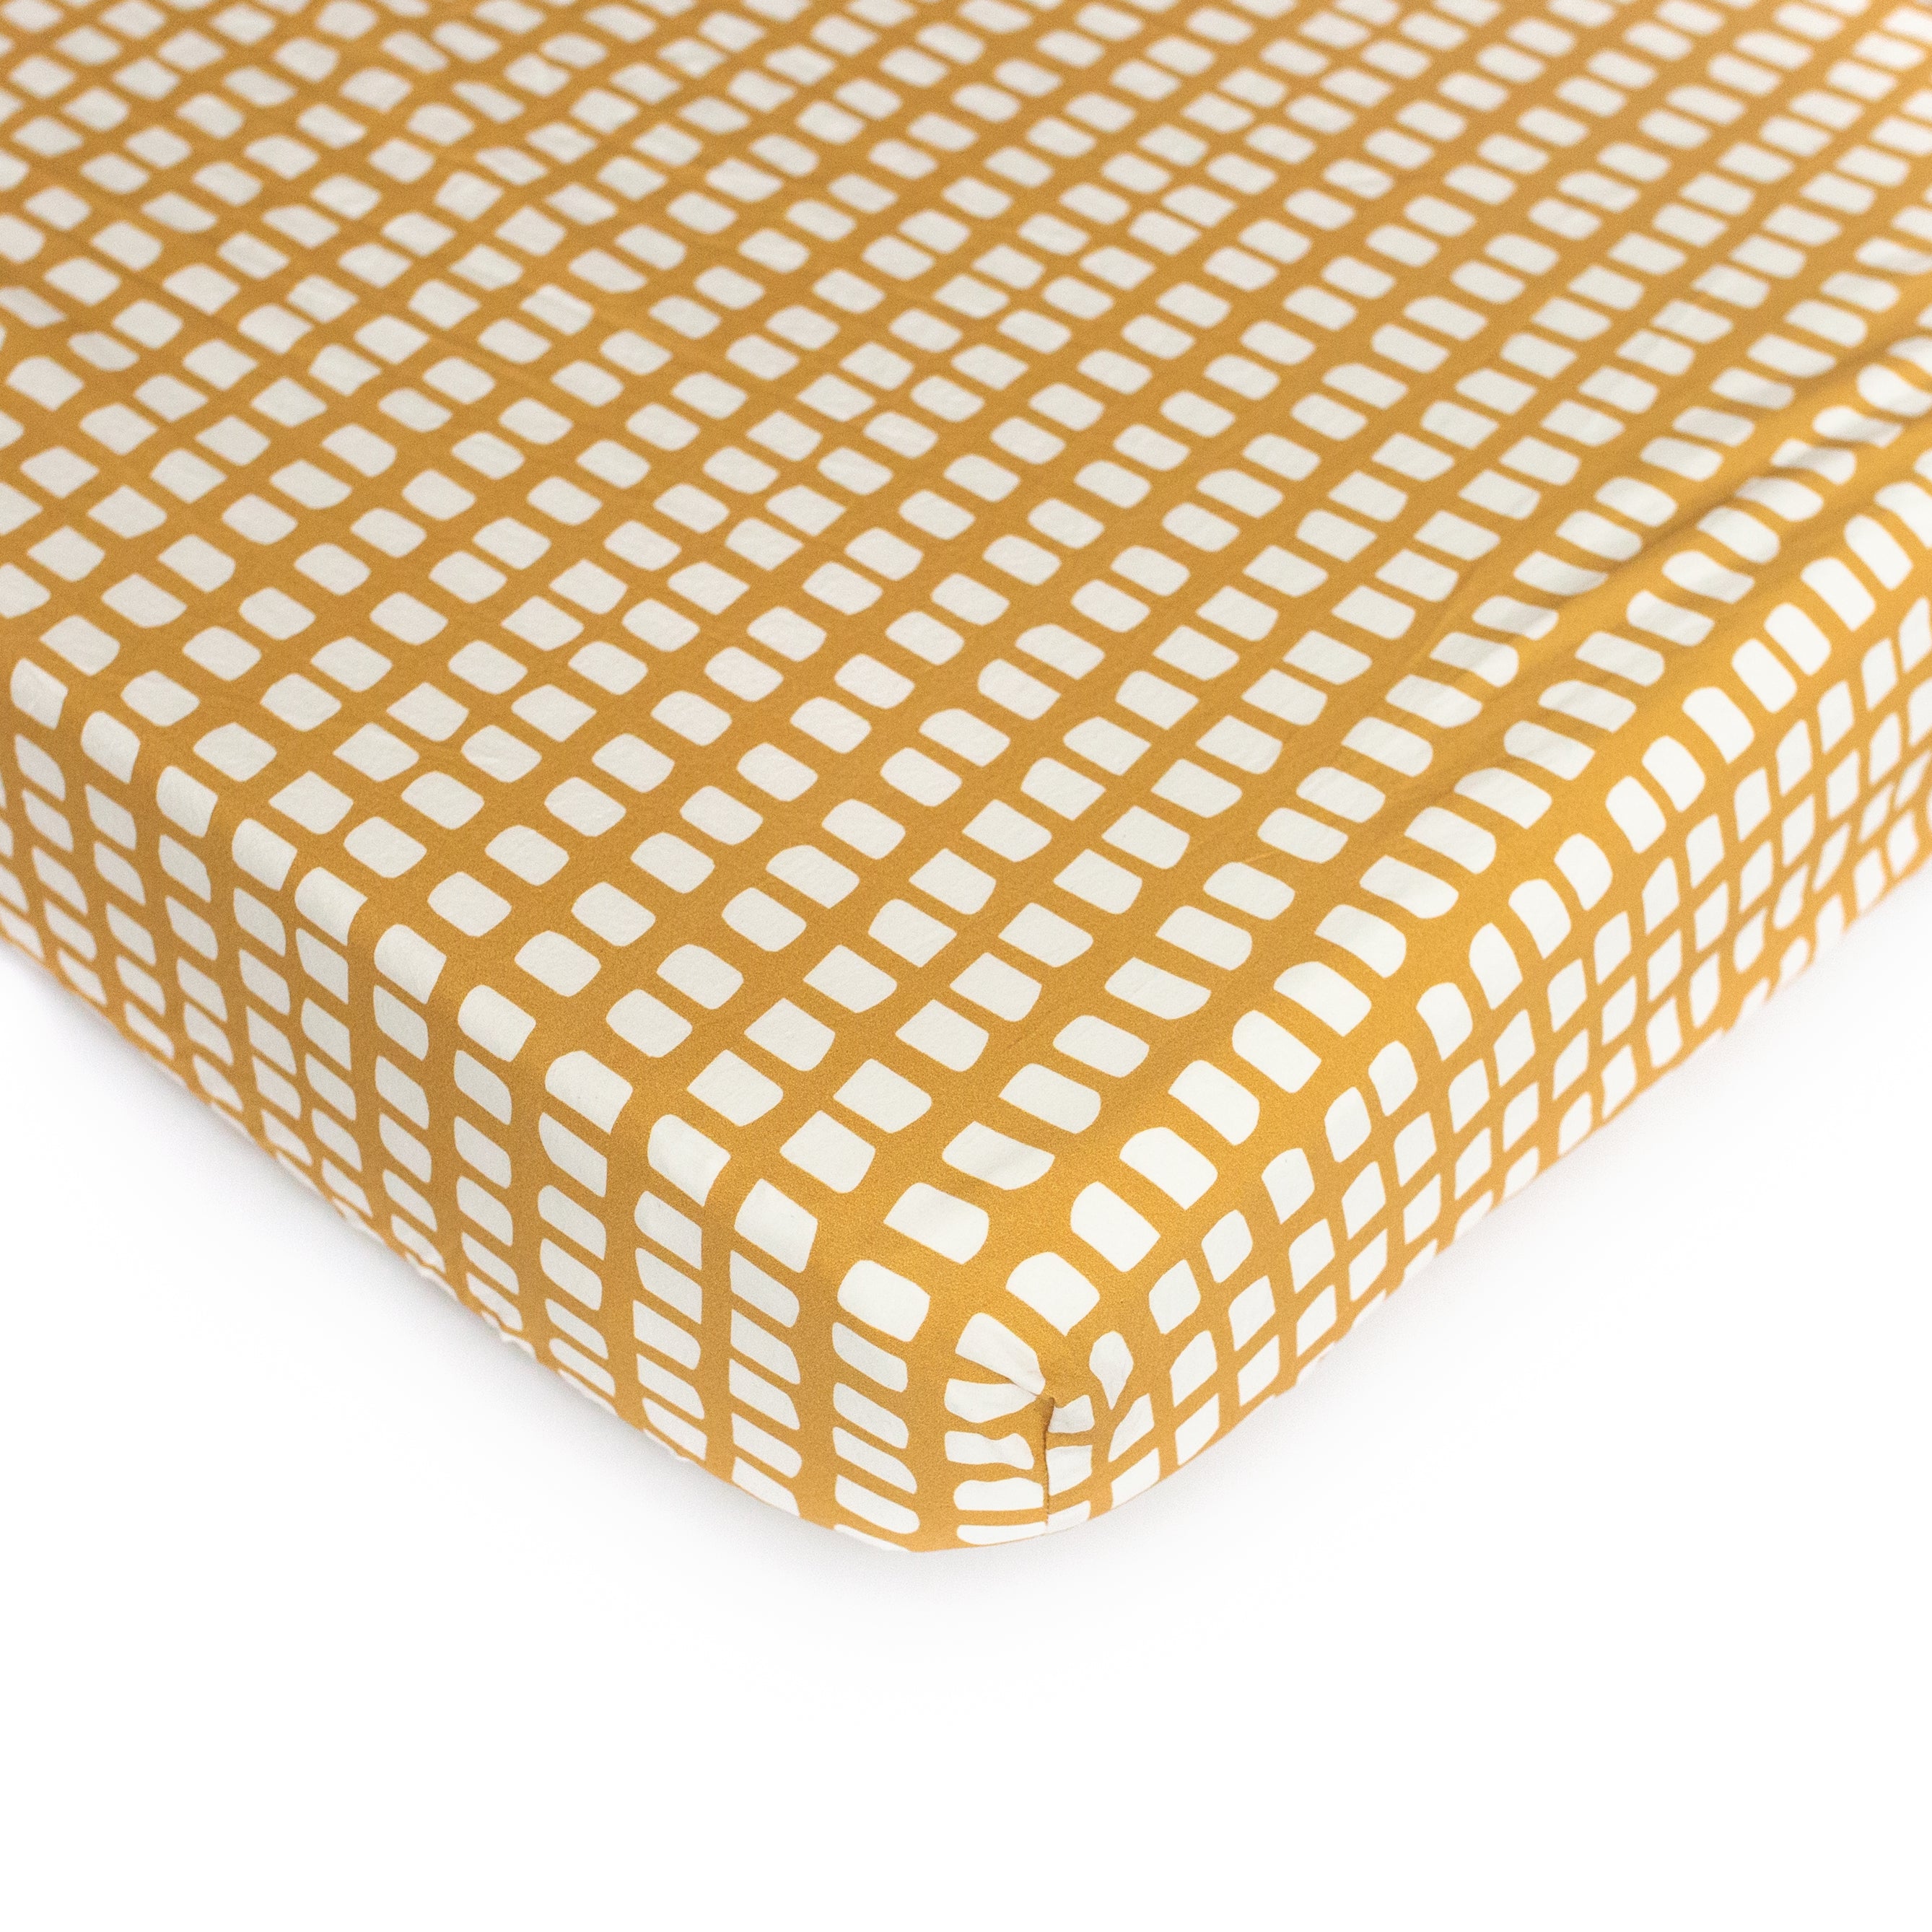 An Oolie organic cotton crib sheet with the picnic print, a deep gold with irregular panels in white.